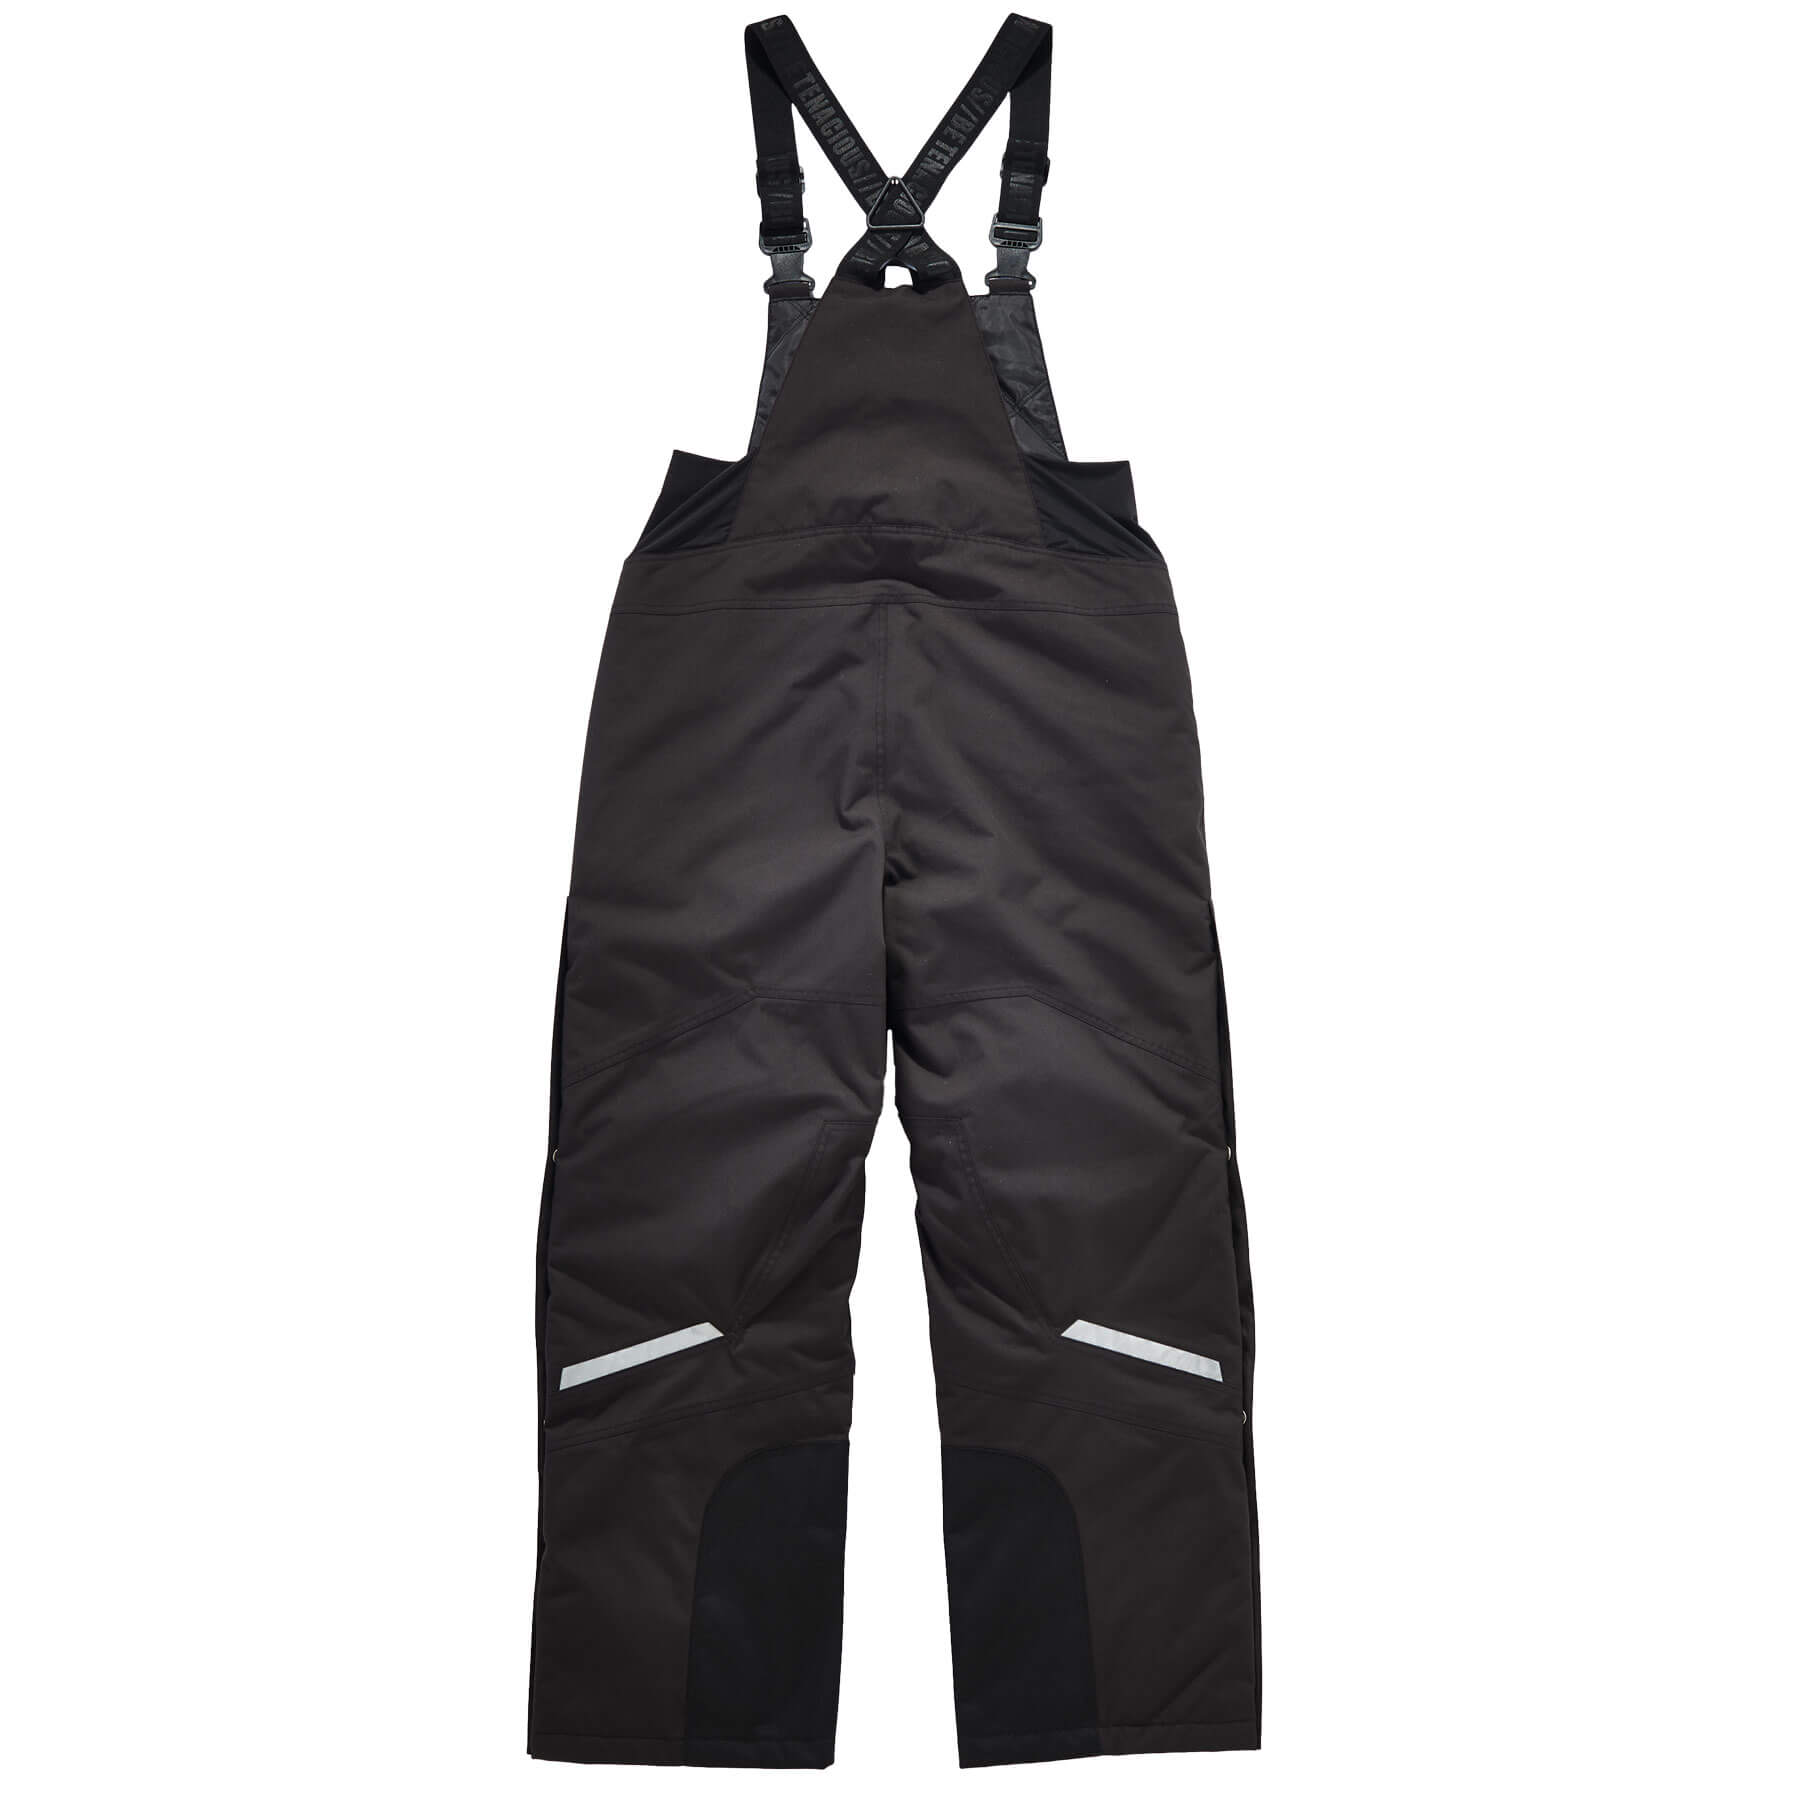 Thermal Bibs, Overalls, Coveralls